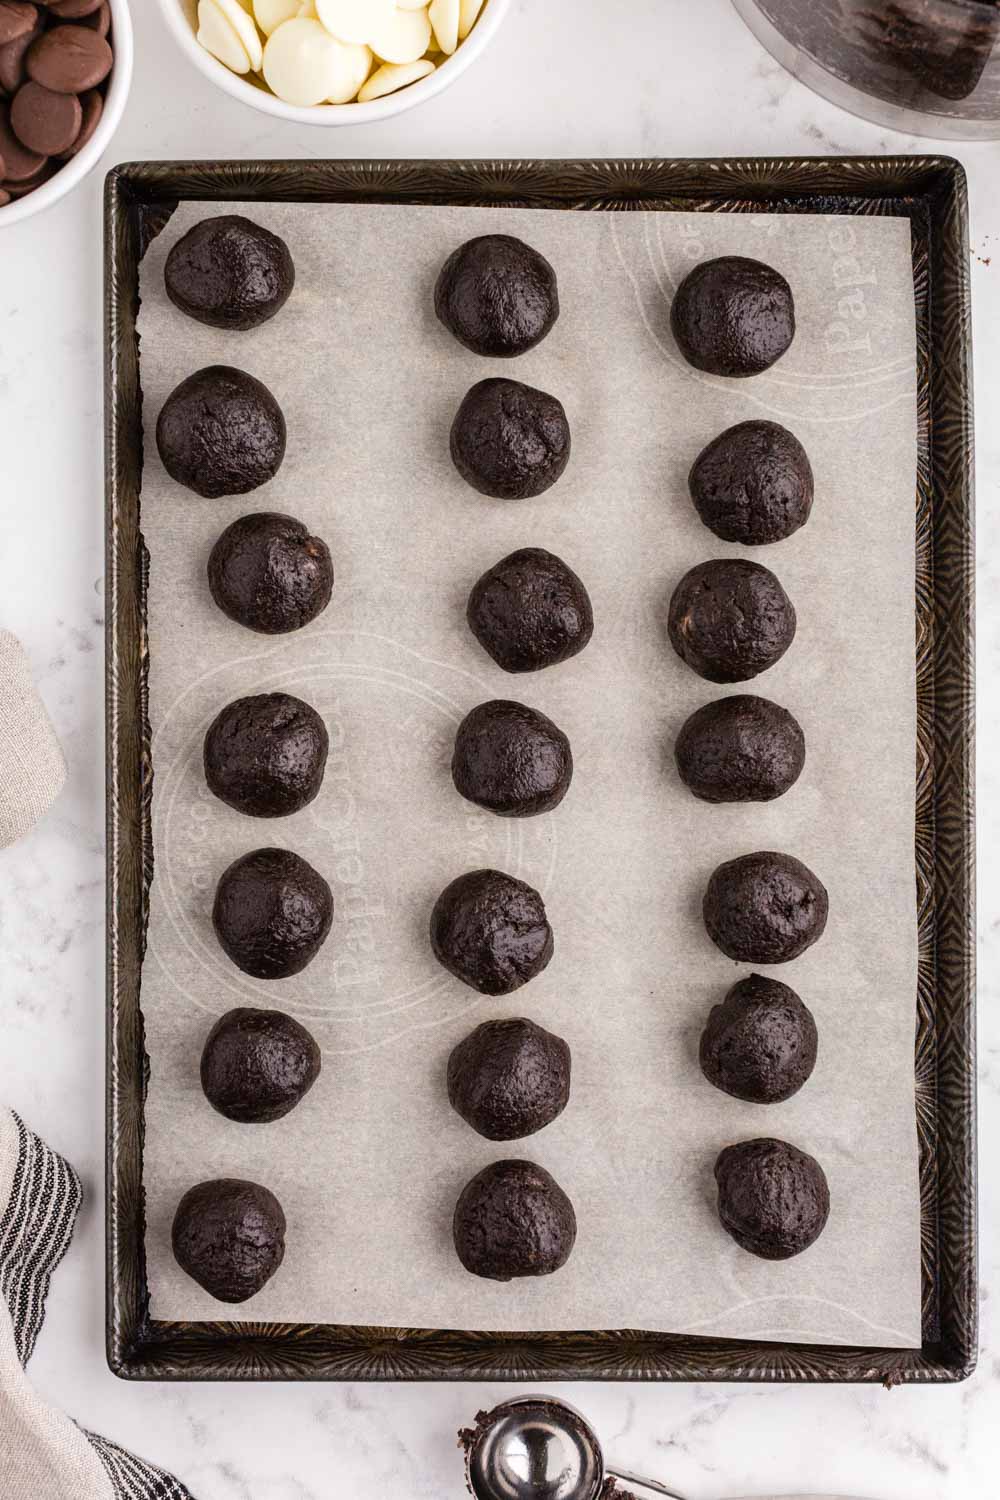 Parchment paper-lined baking sheet with frozen Oreo balls, metal cookie scoop, bowl of dark chocolate melting wafers, bowl of white chocolate melting wafers, beige linen, on a white marble countertop